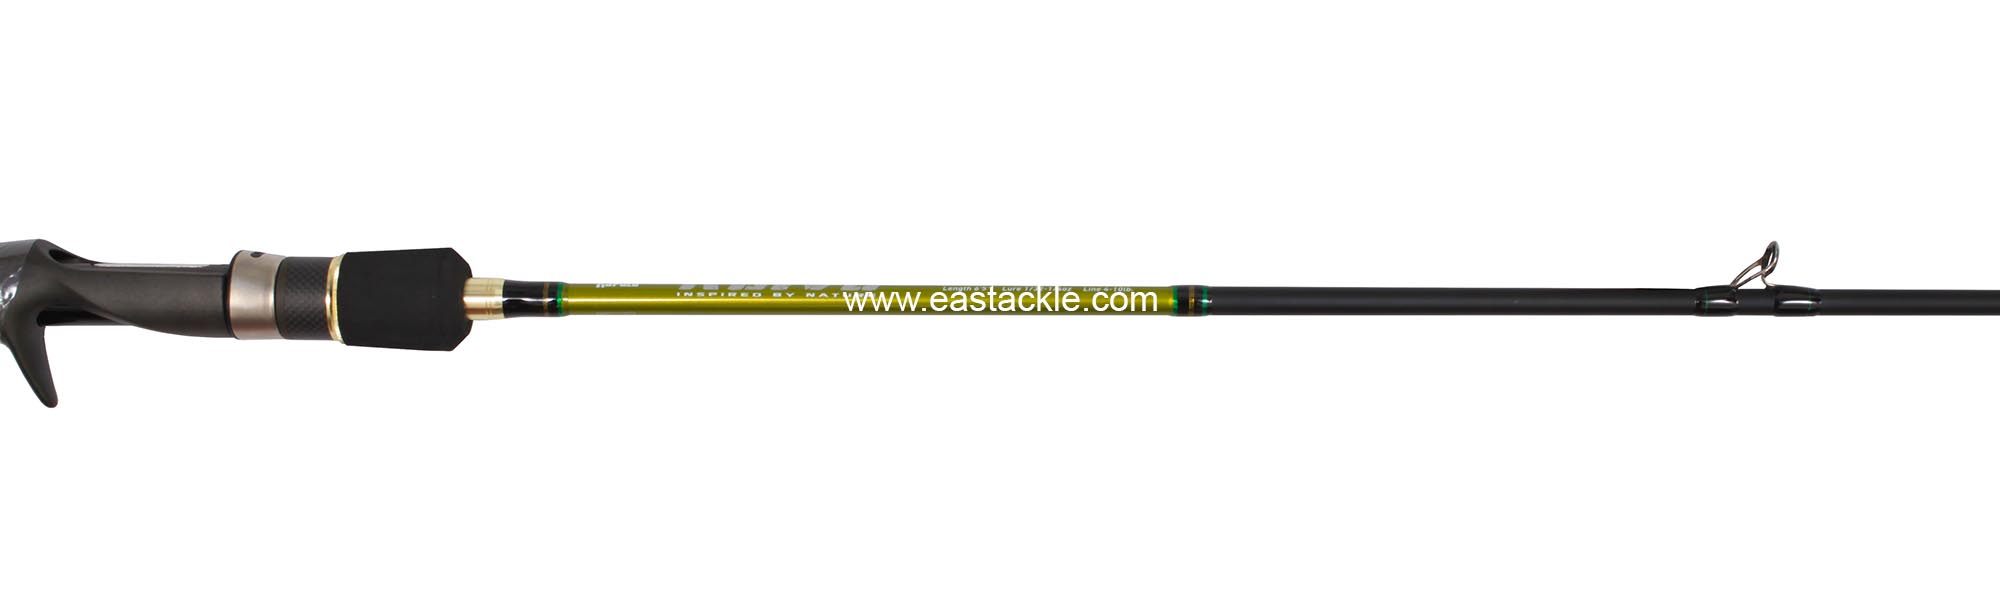 Rapala - Koivu - KVC652ML - Bait Casting Rod - Reel Seat Fore Grip to Stripper Guide (Side View) | Eastackle